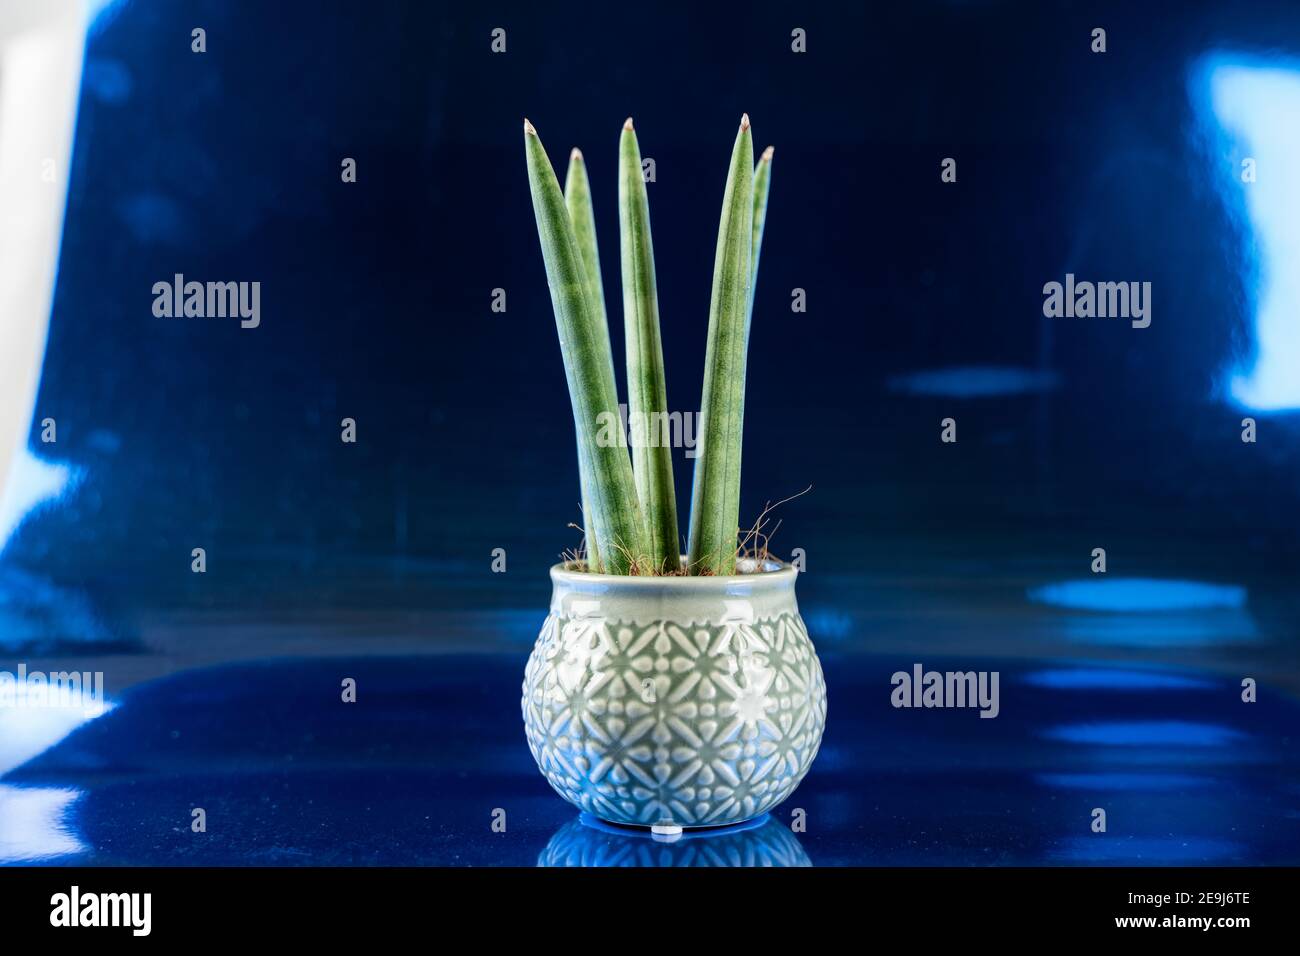 sansevieria cylindrica in pot with blue metallic background Stock Photo